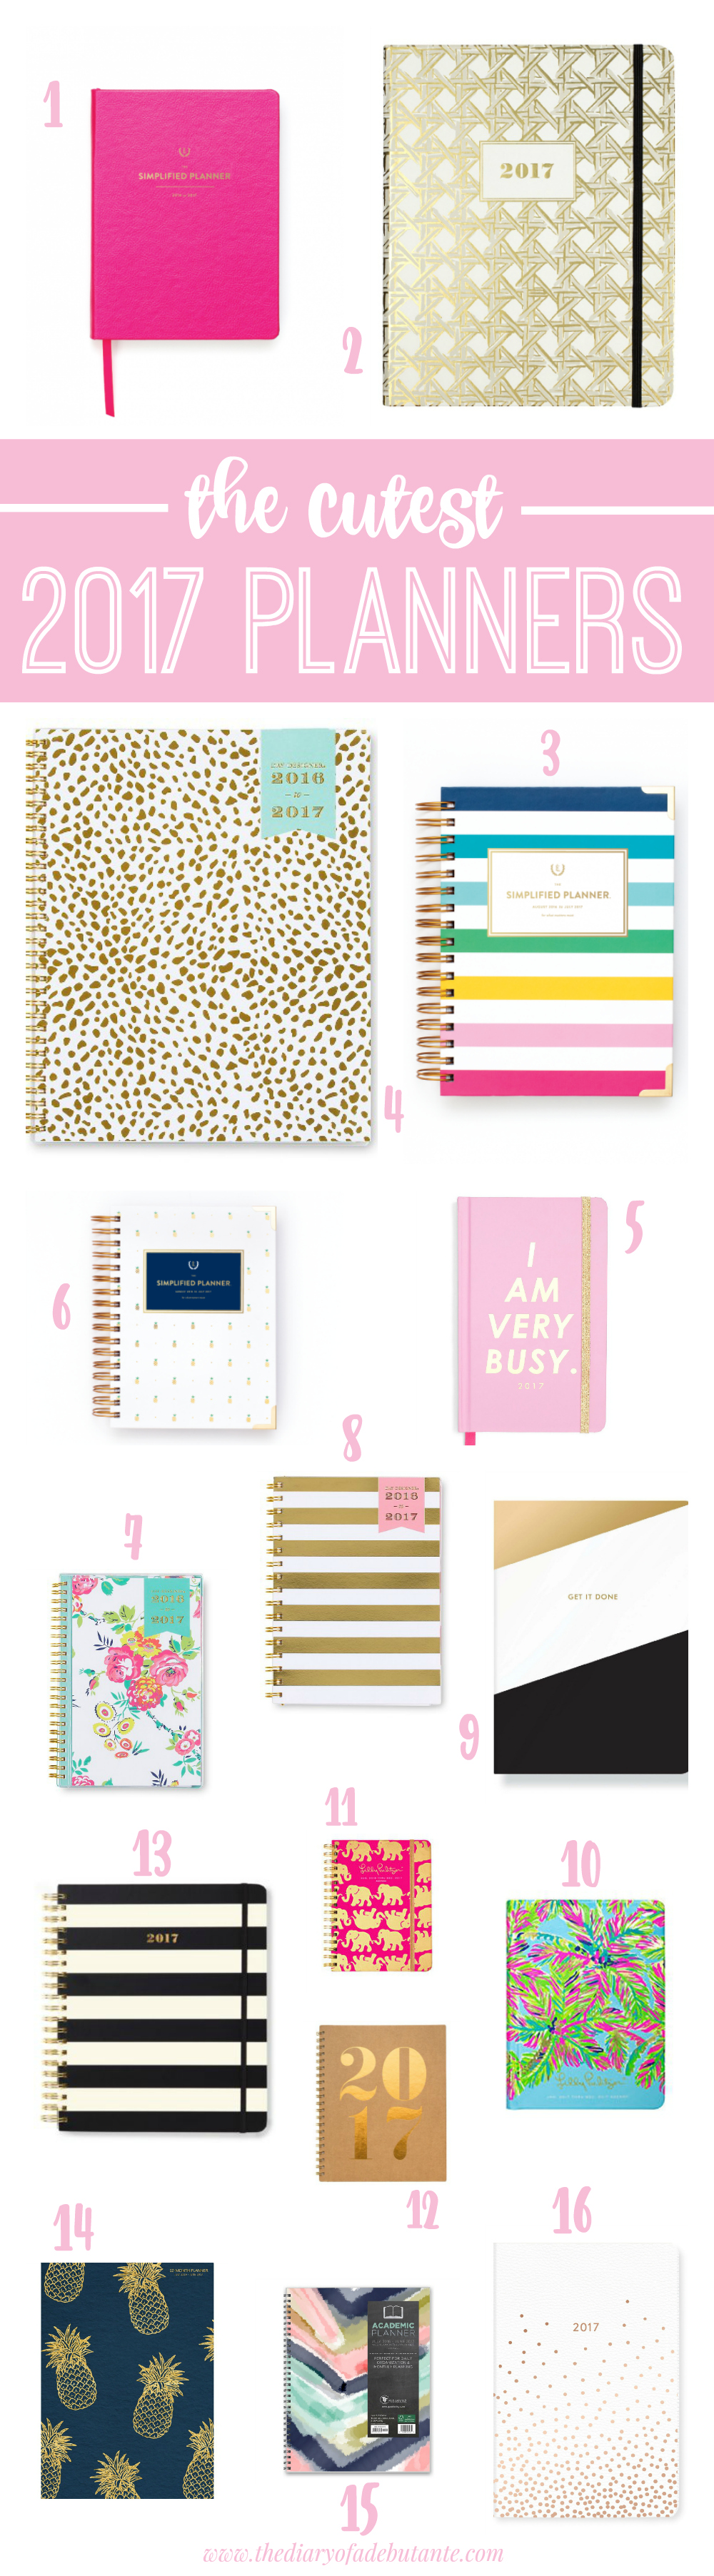 16 of the cutest 2017 planners for the 2017-2018 academic year